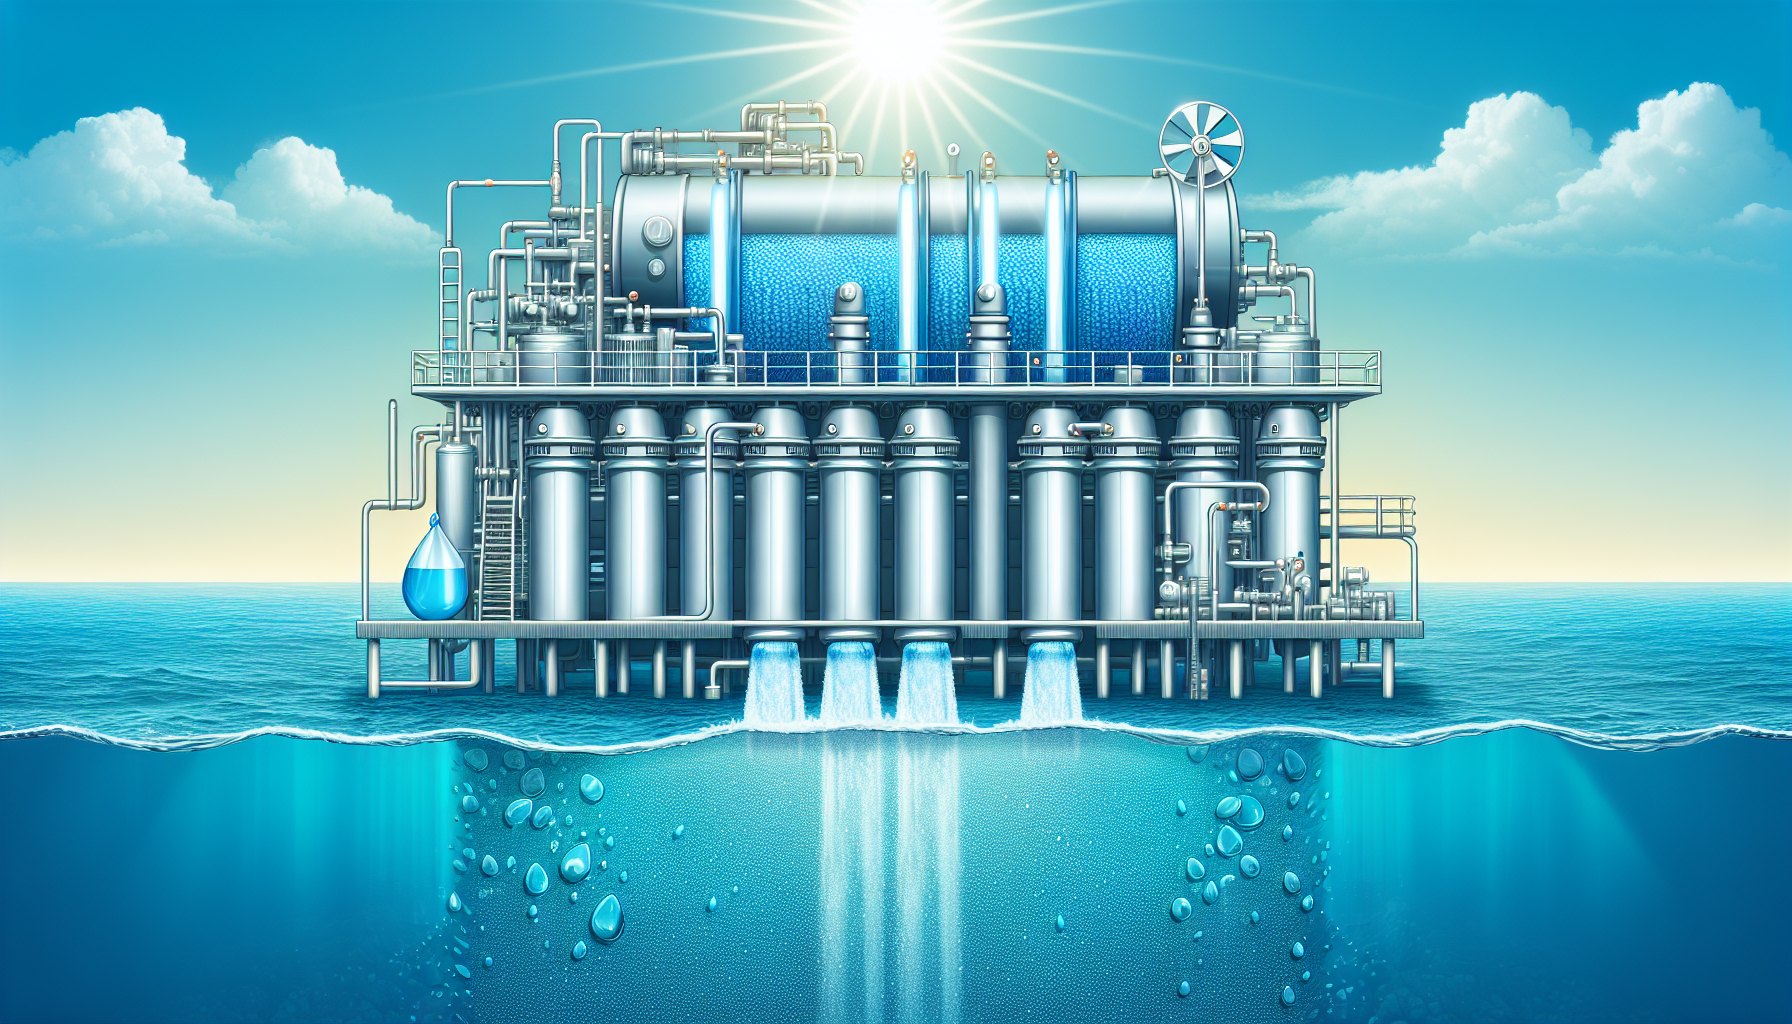 Illustration of applications of osmosis in water purification and desalination